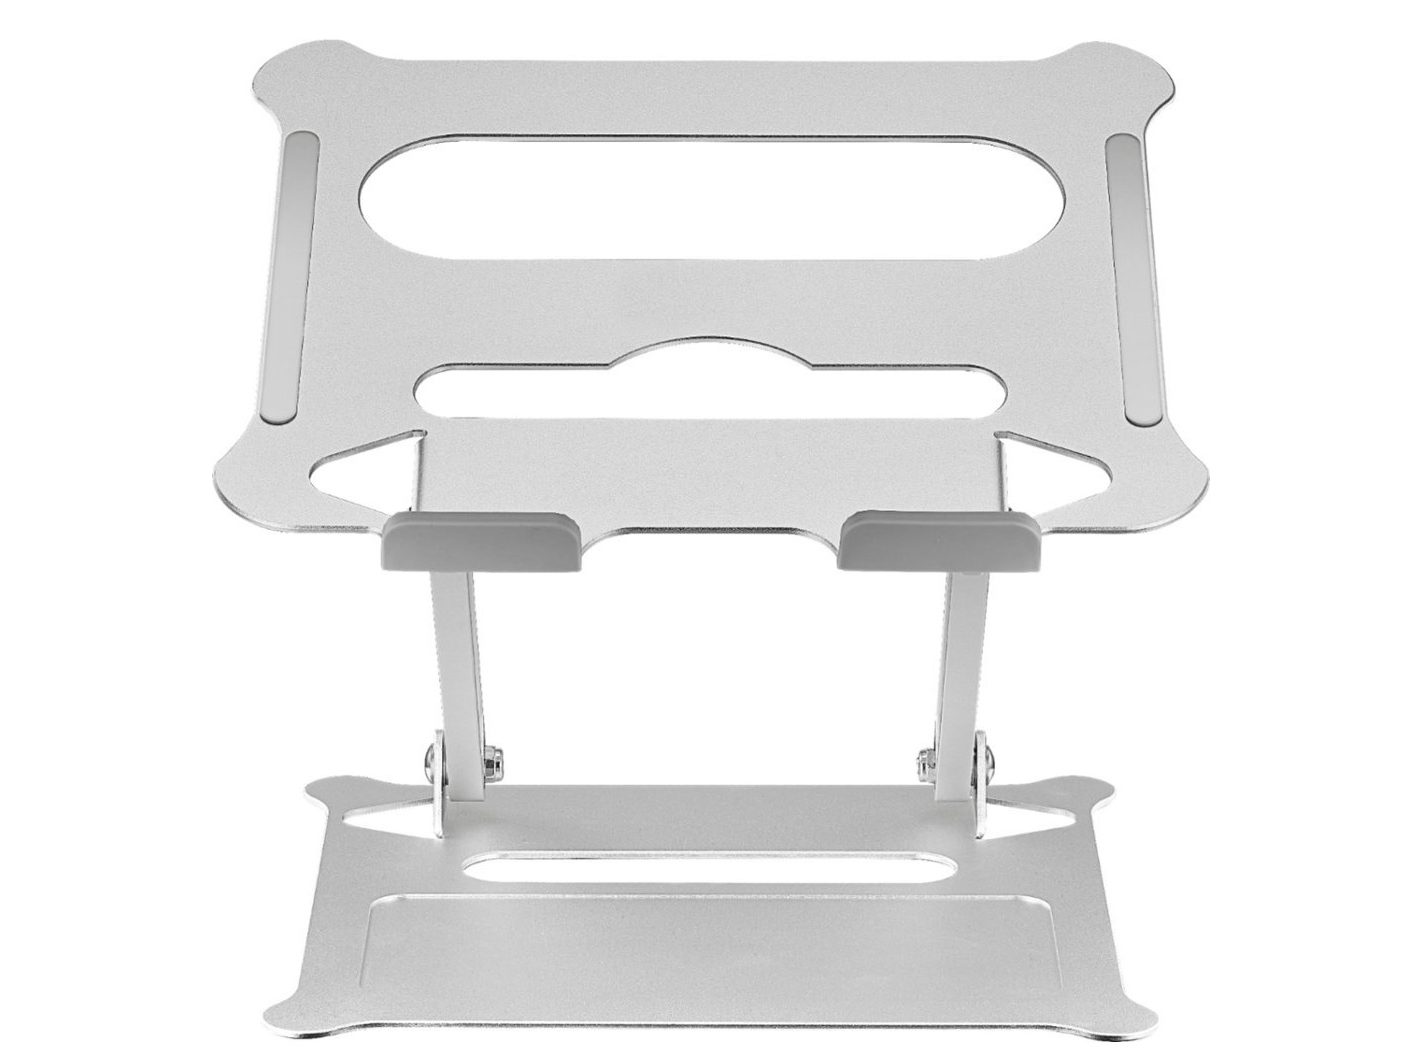 The Insignia Ergonomic Laptop Stand in a lifted position.